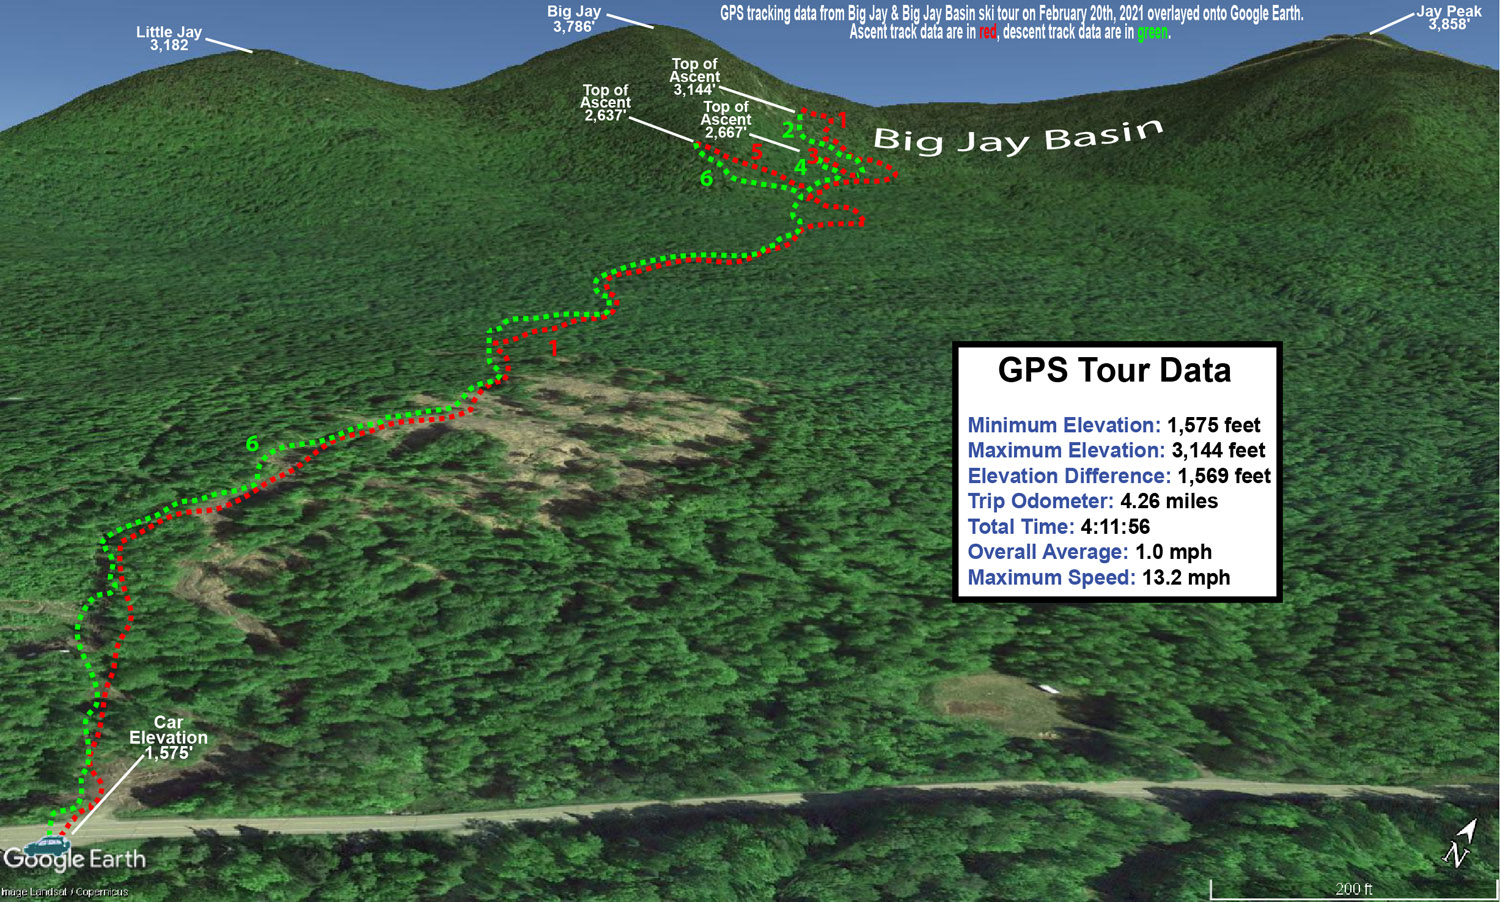 A Google Earth map with GPS tracking data for a ski tour in the Jay Peak backcountry in Vermont on February 20th, 2021